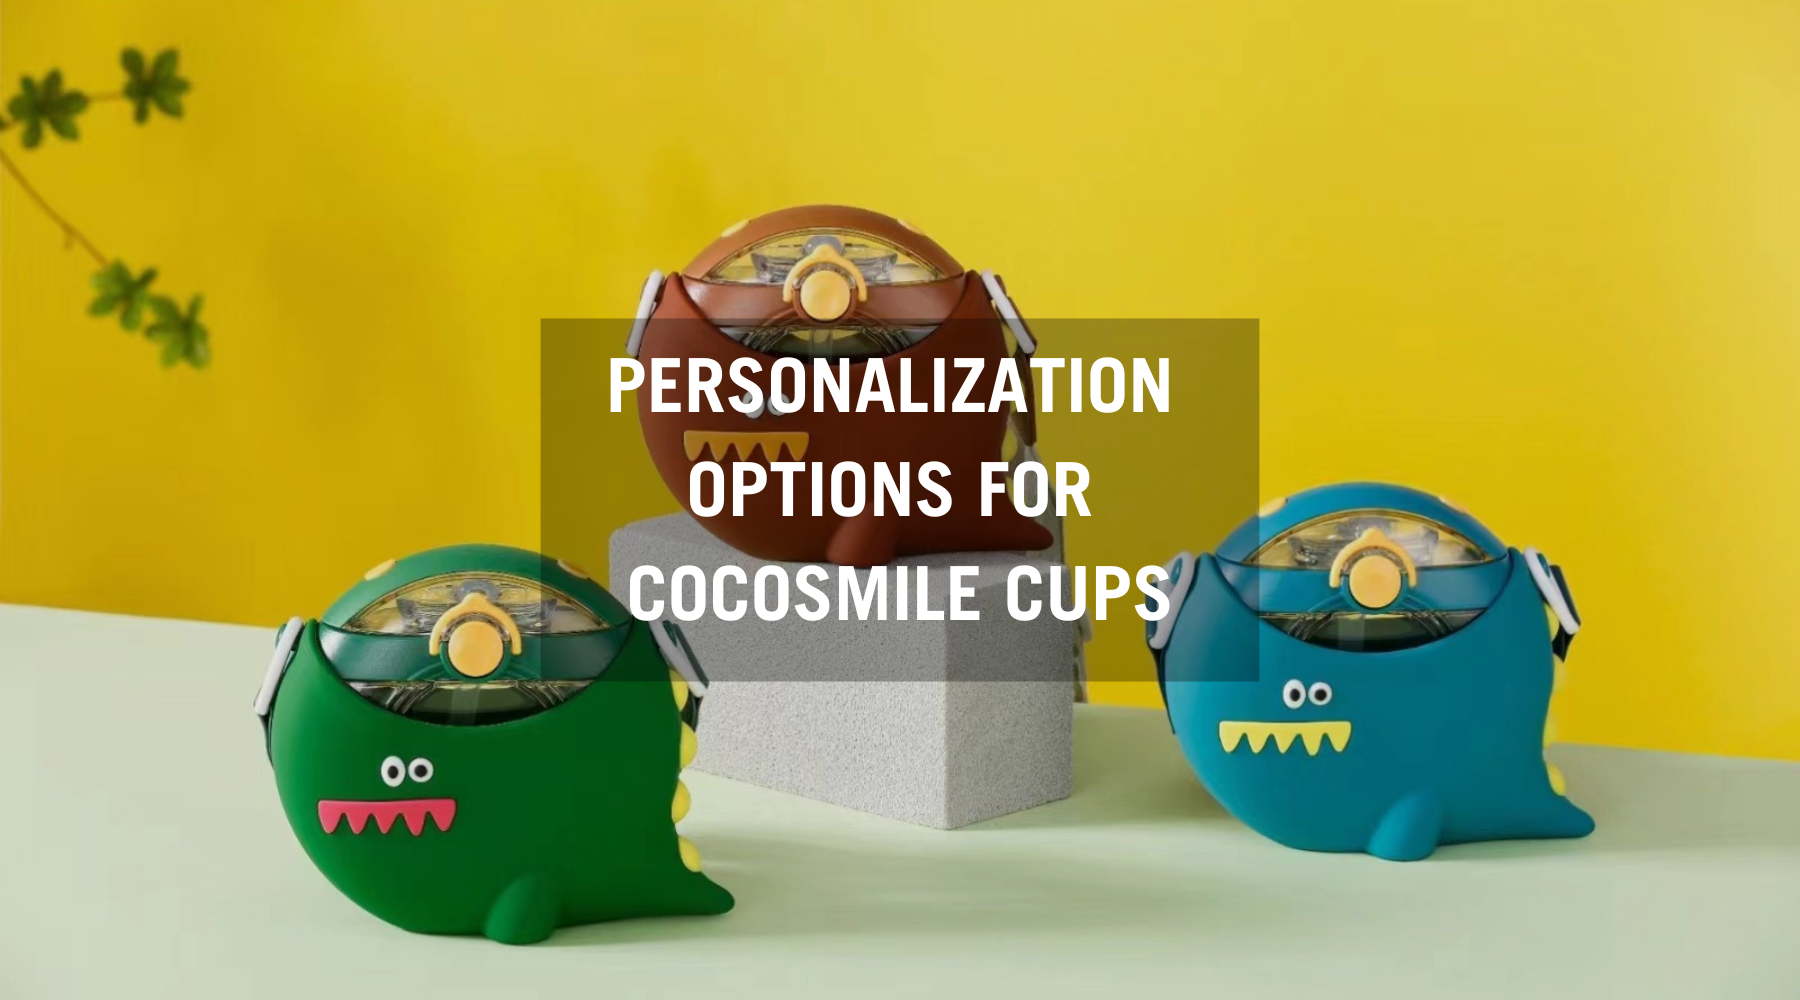 Personalization Options for Cocosmile Cups